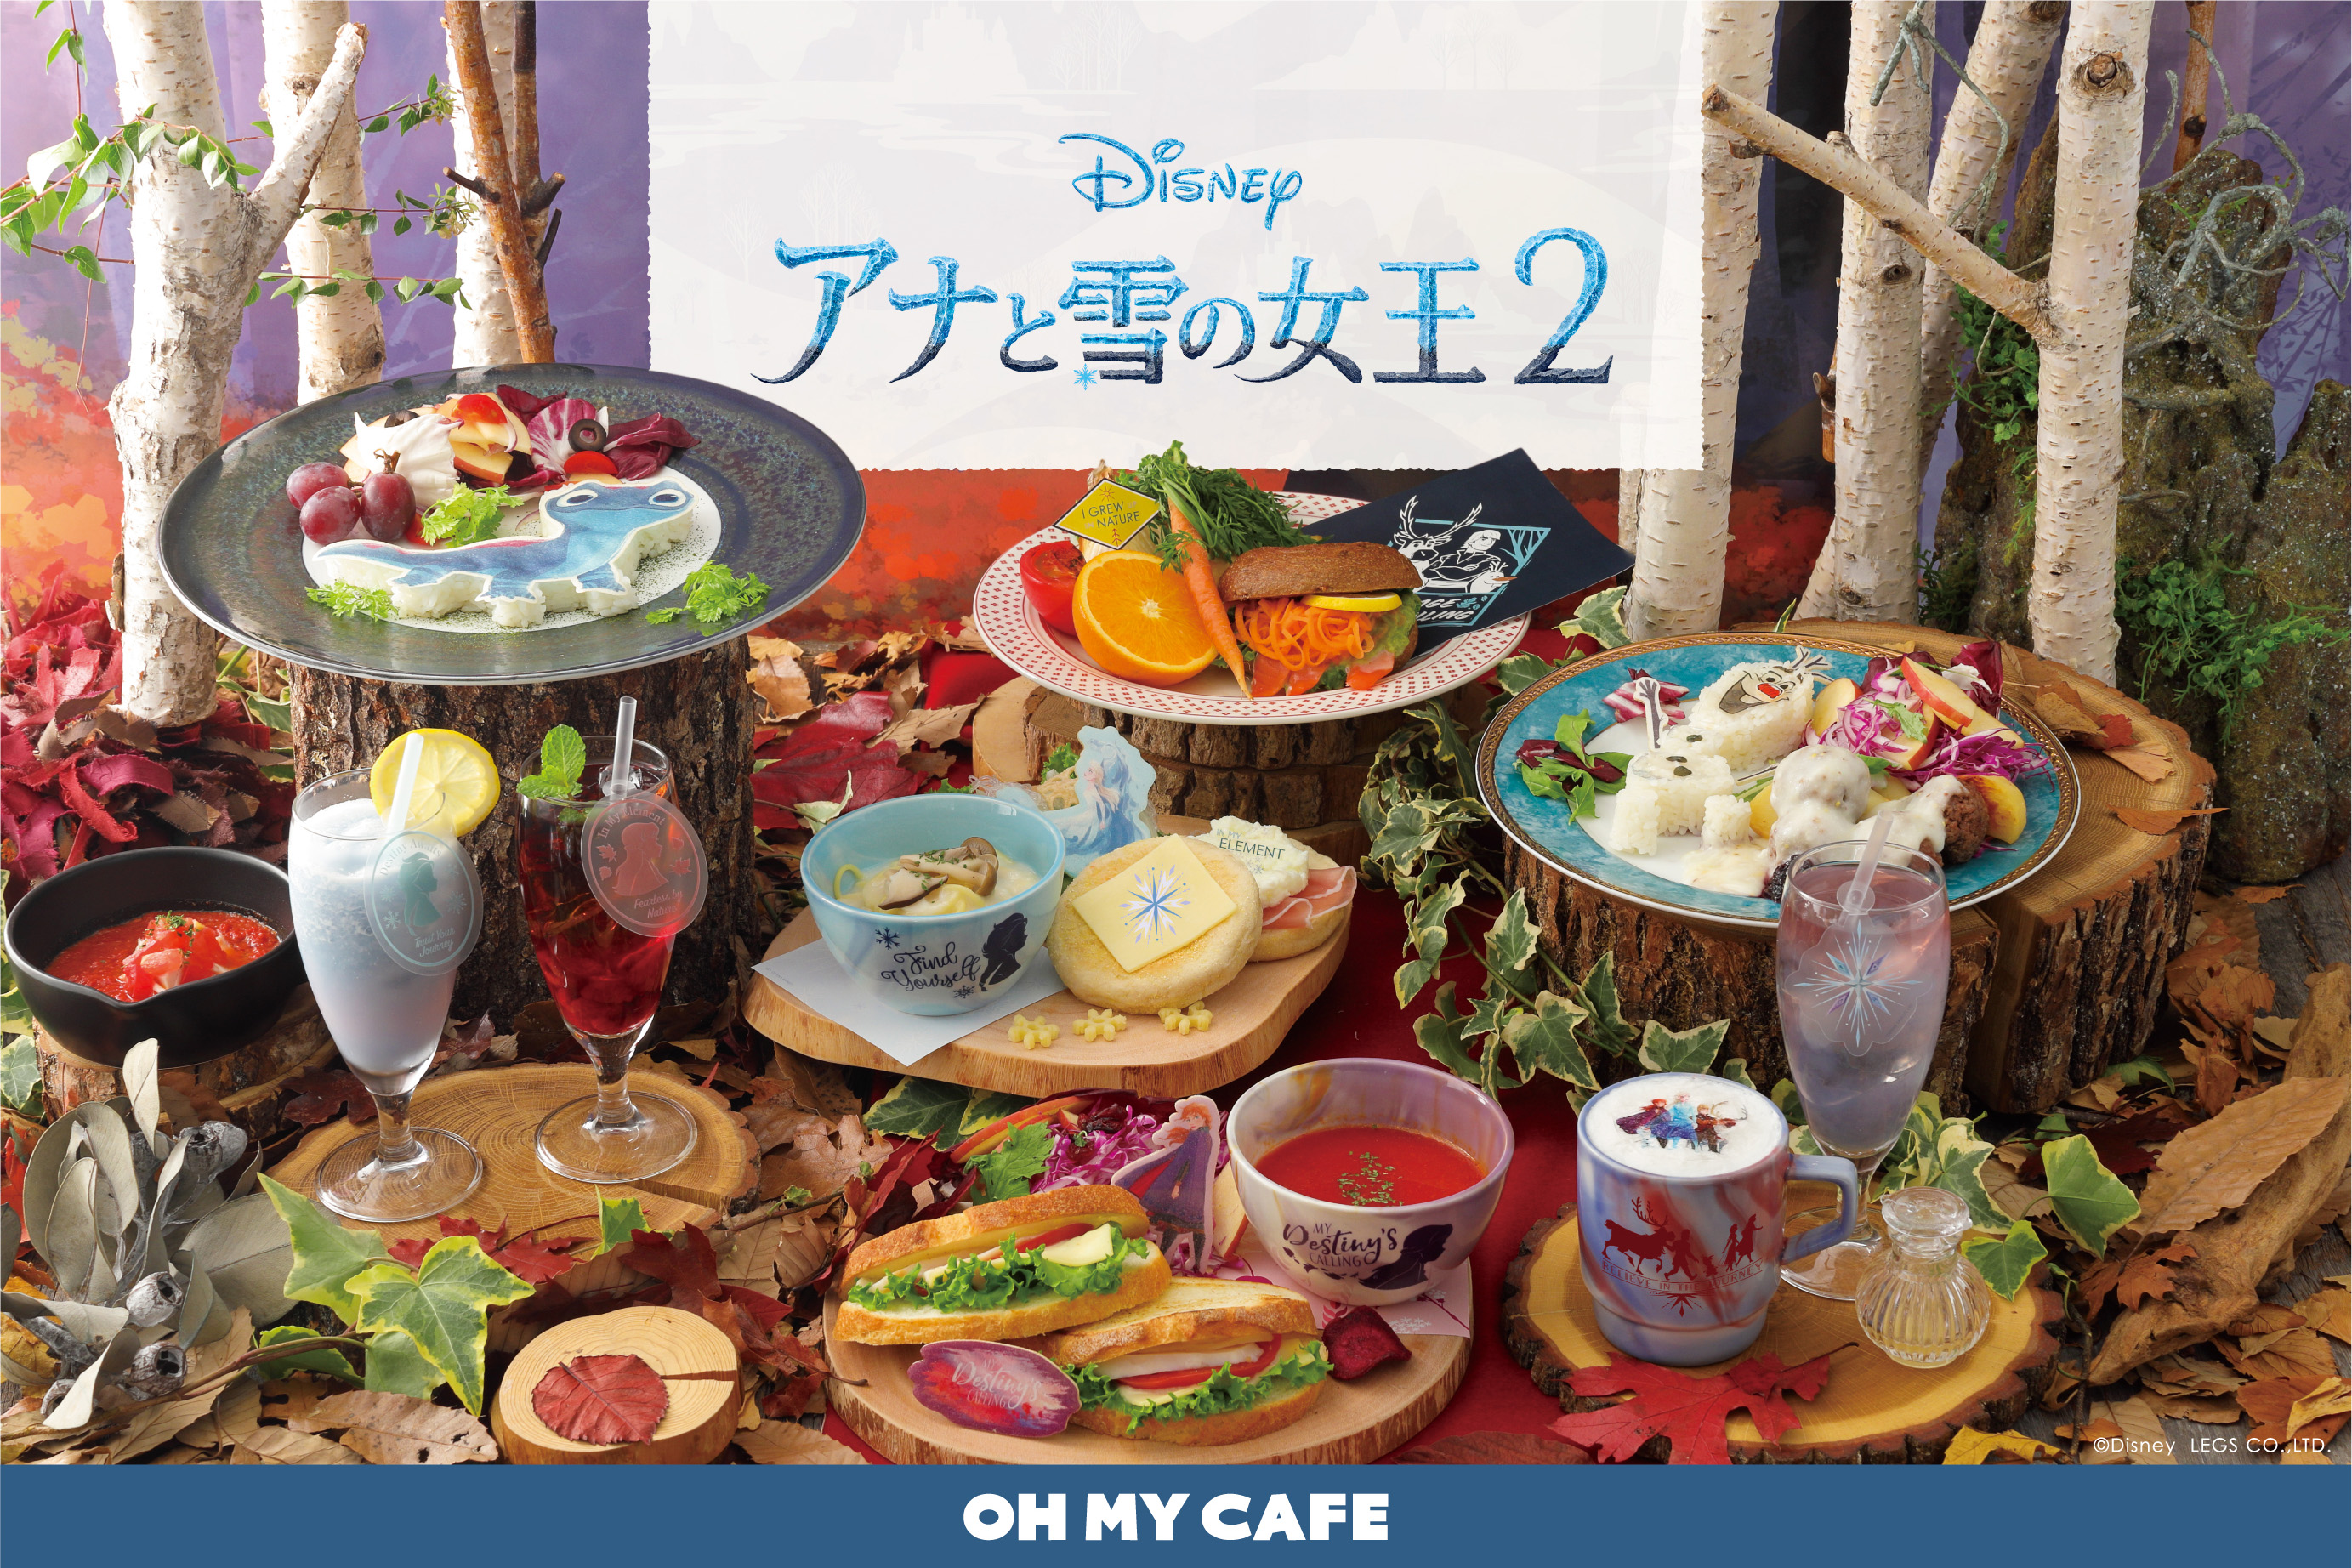 Frozen 2 Cafe to Open in Japan: Tokyo, Osaka, Kyoto and more